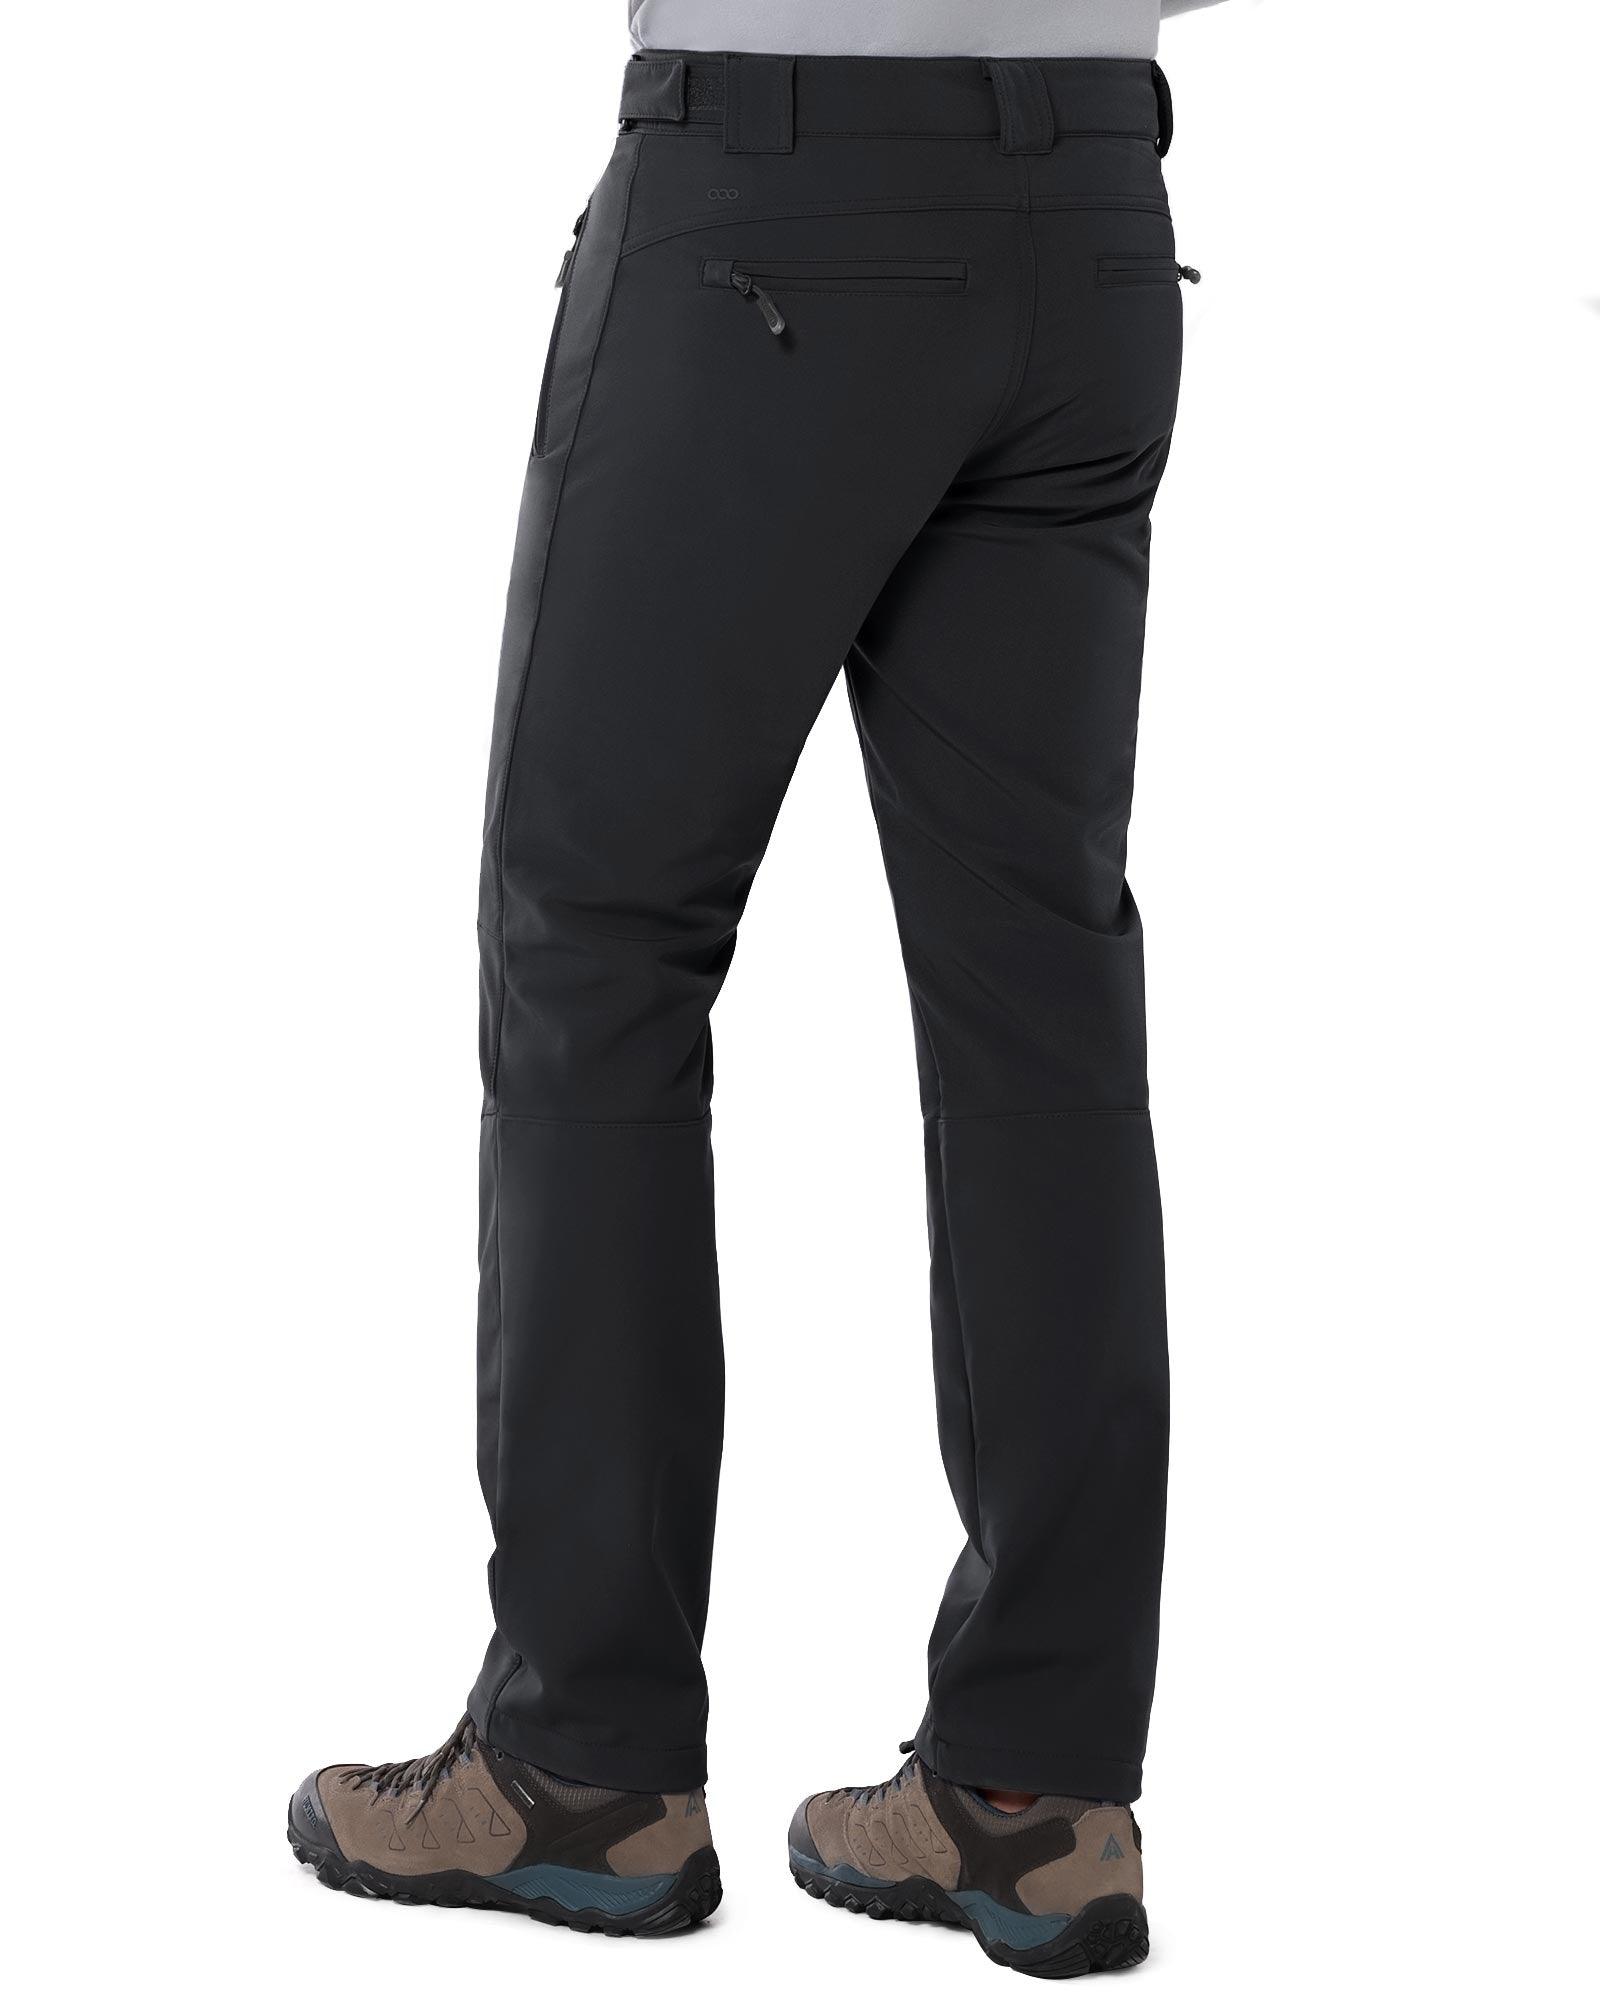 8000mm W/P Index Men's Snow Fleece Lined Pants with 4 Pockets and